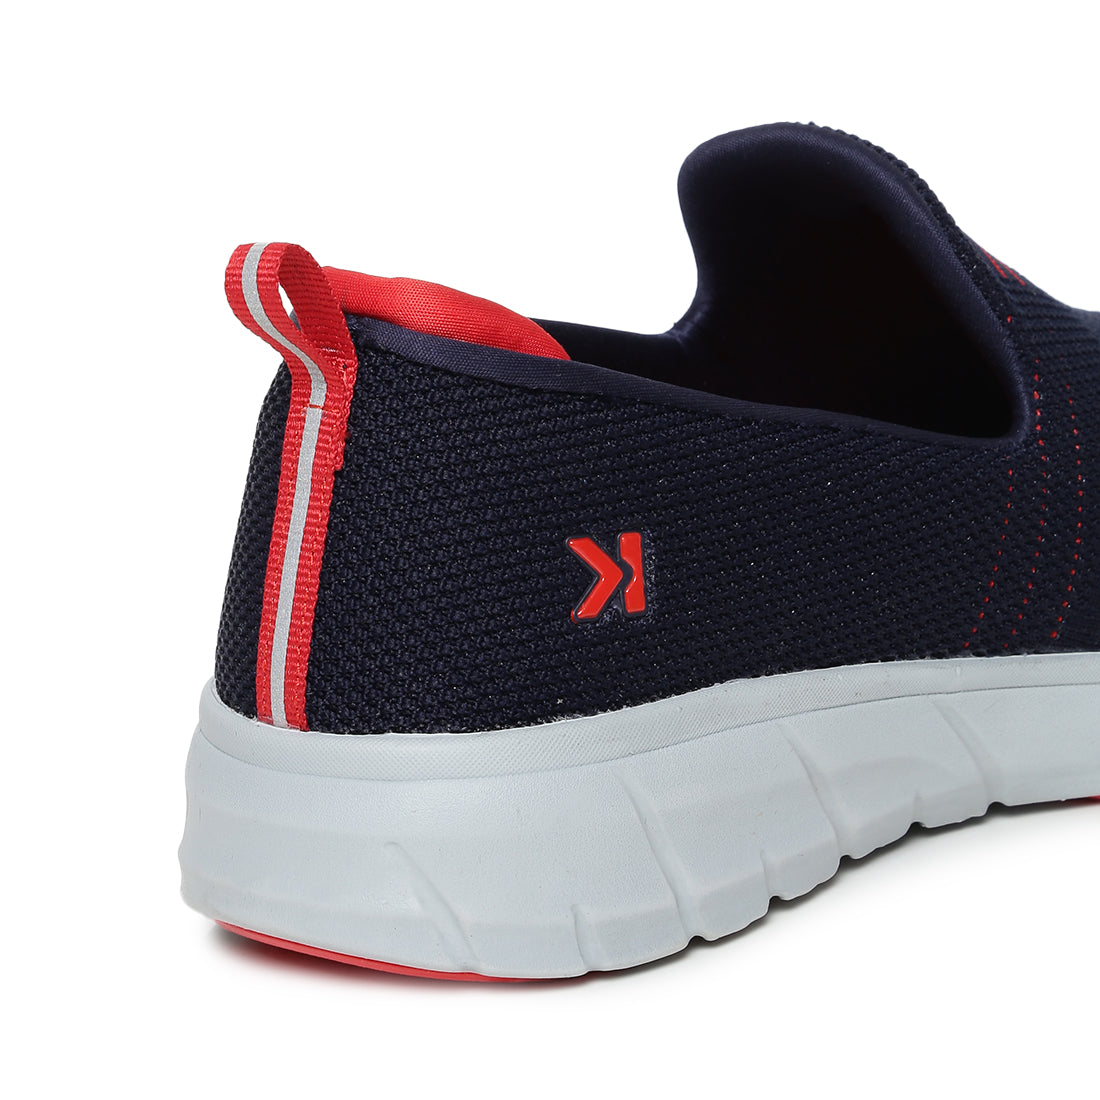 Eeken Blue - Red Athleisure Shoes for Men